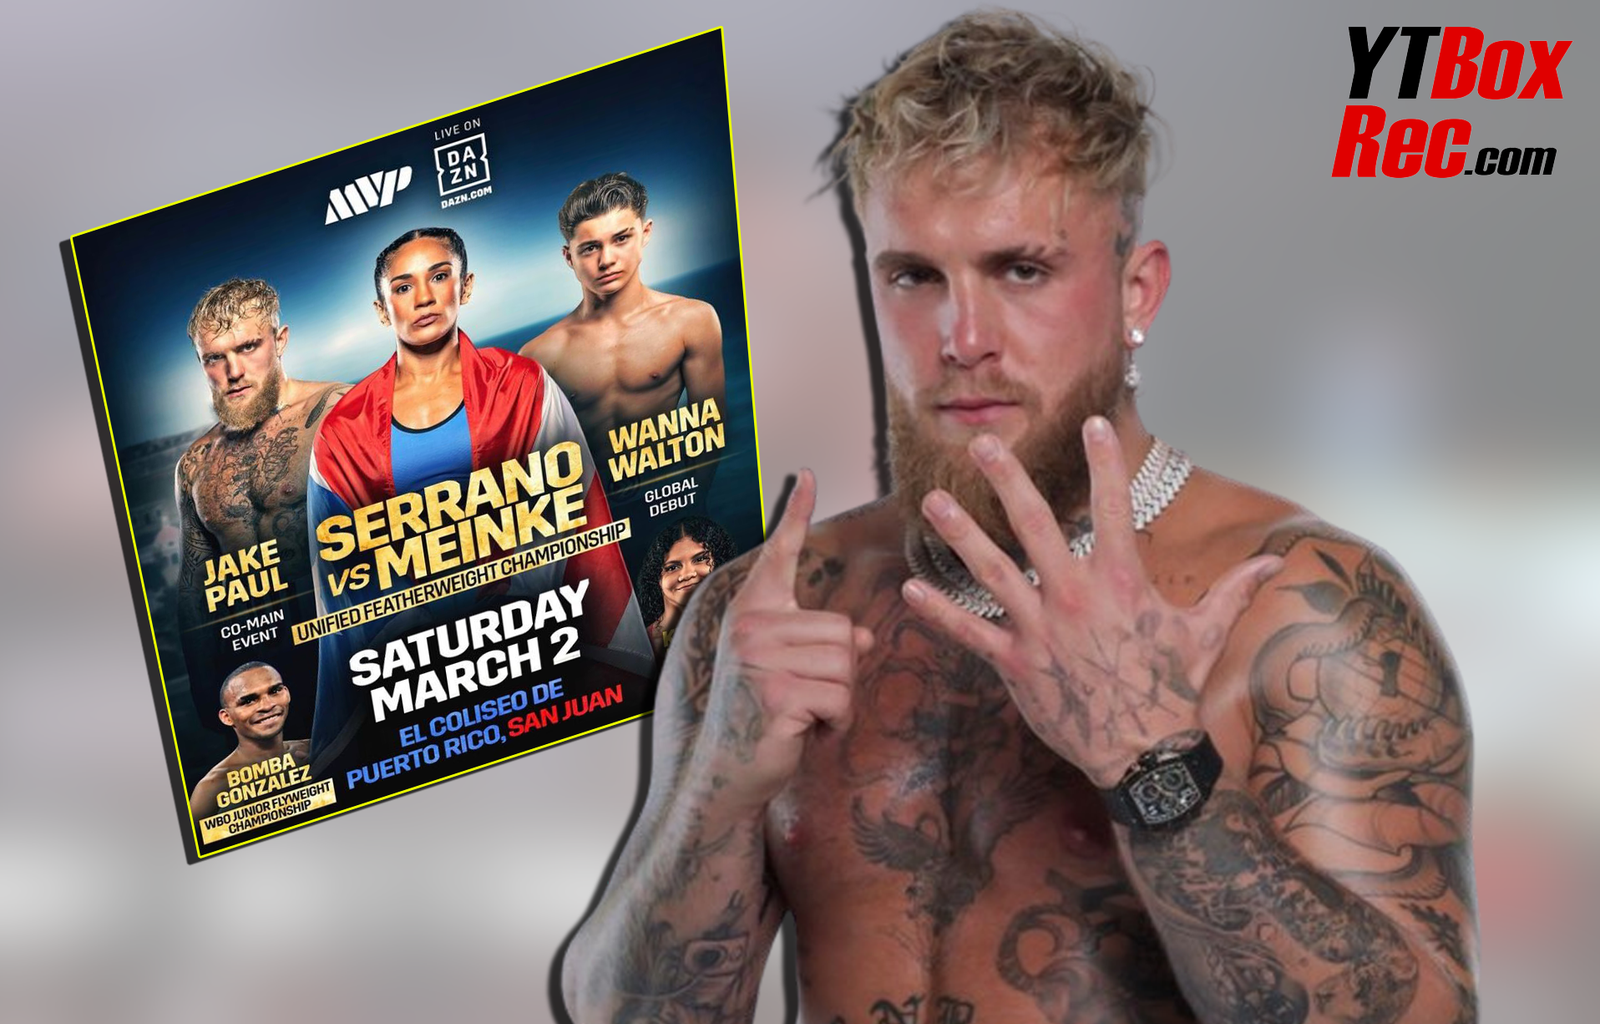 Jake Paul Is Back As A Co-Main Event For The First Time Since 2020!